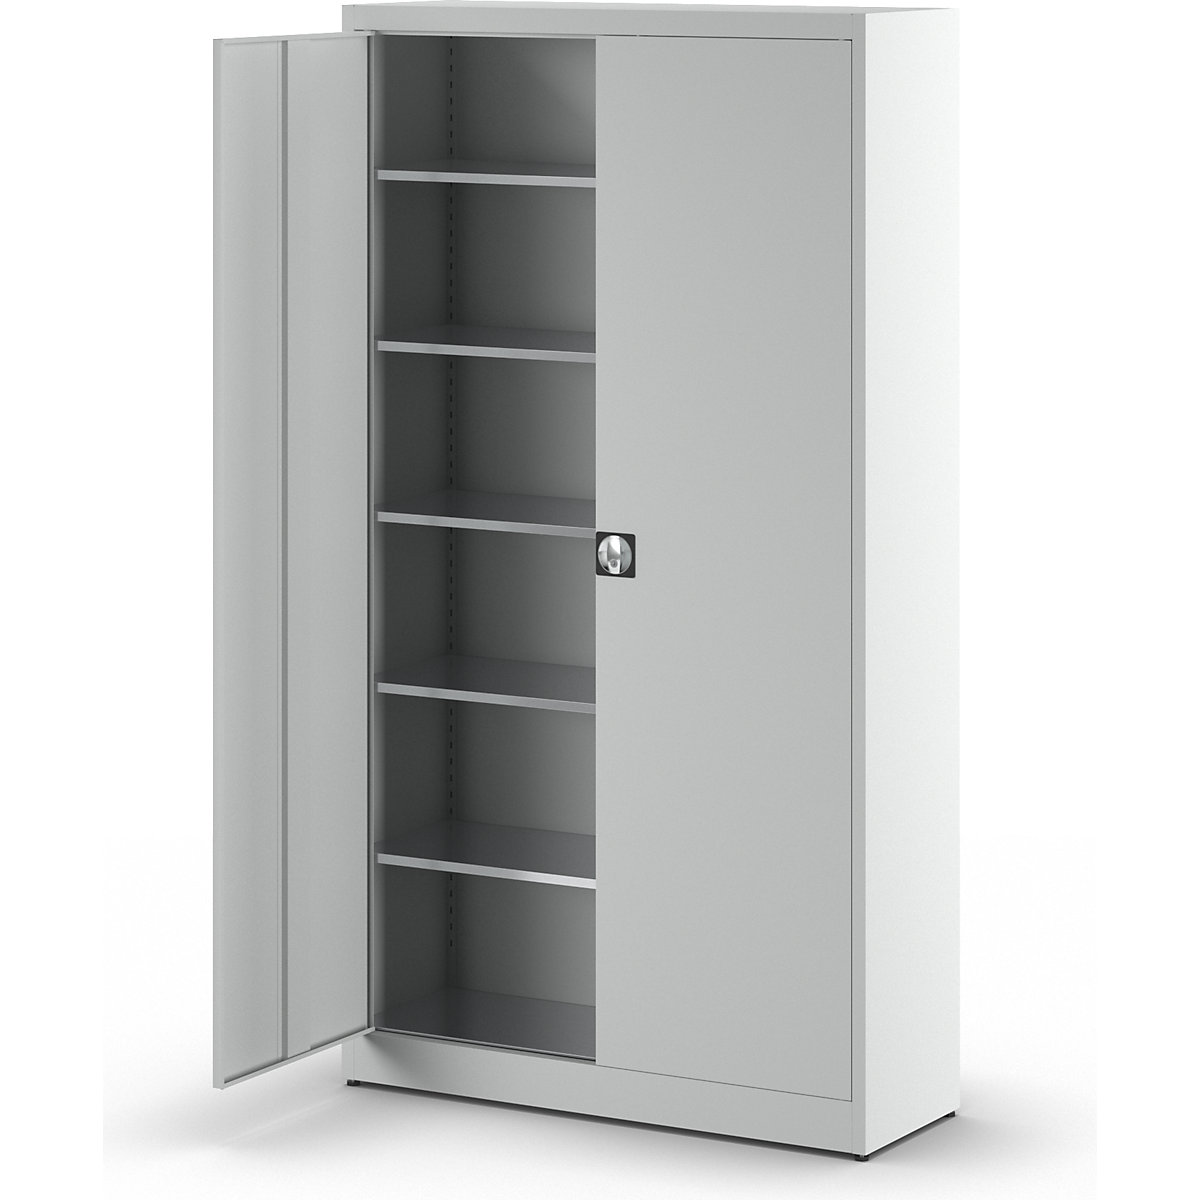 Armoire universelle extra-haute – mauser